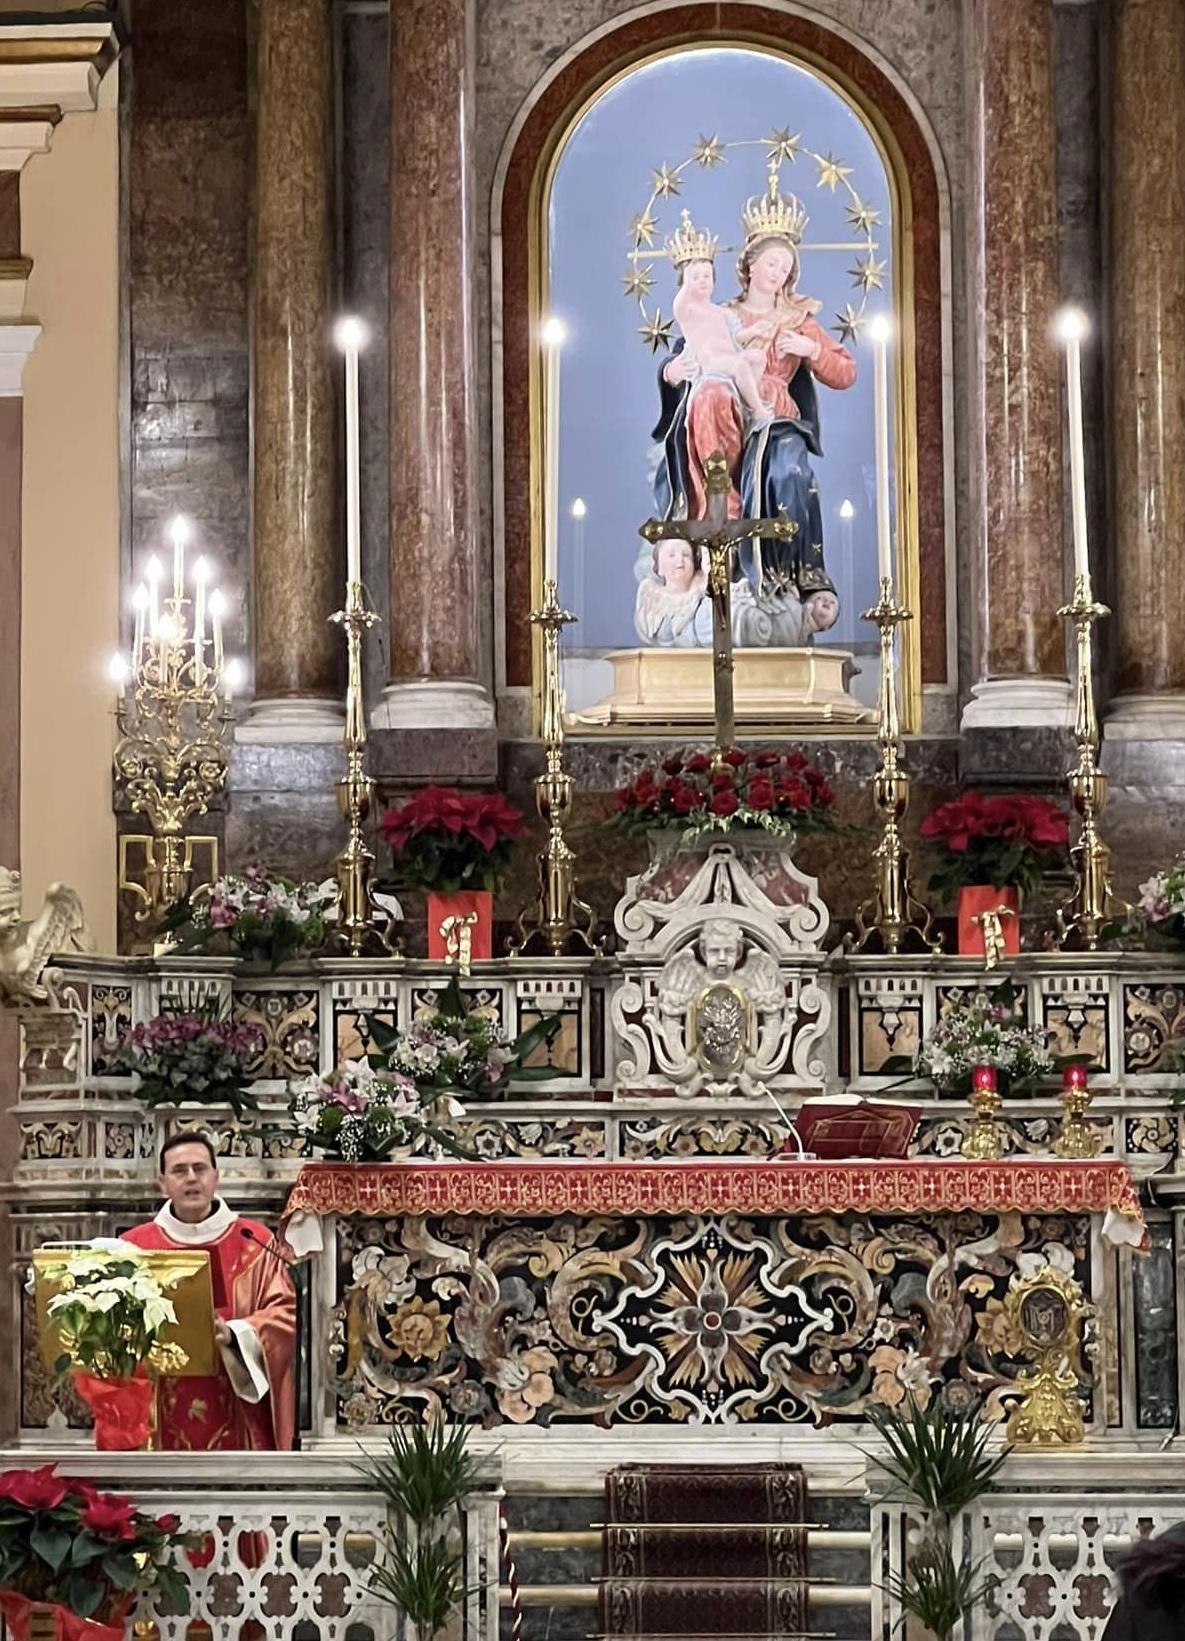 High altar with the statue of Our Lady of Grace